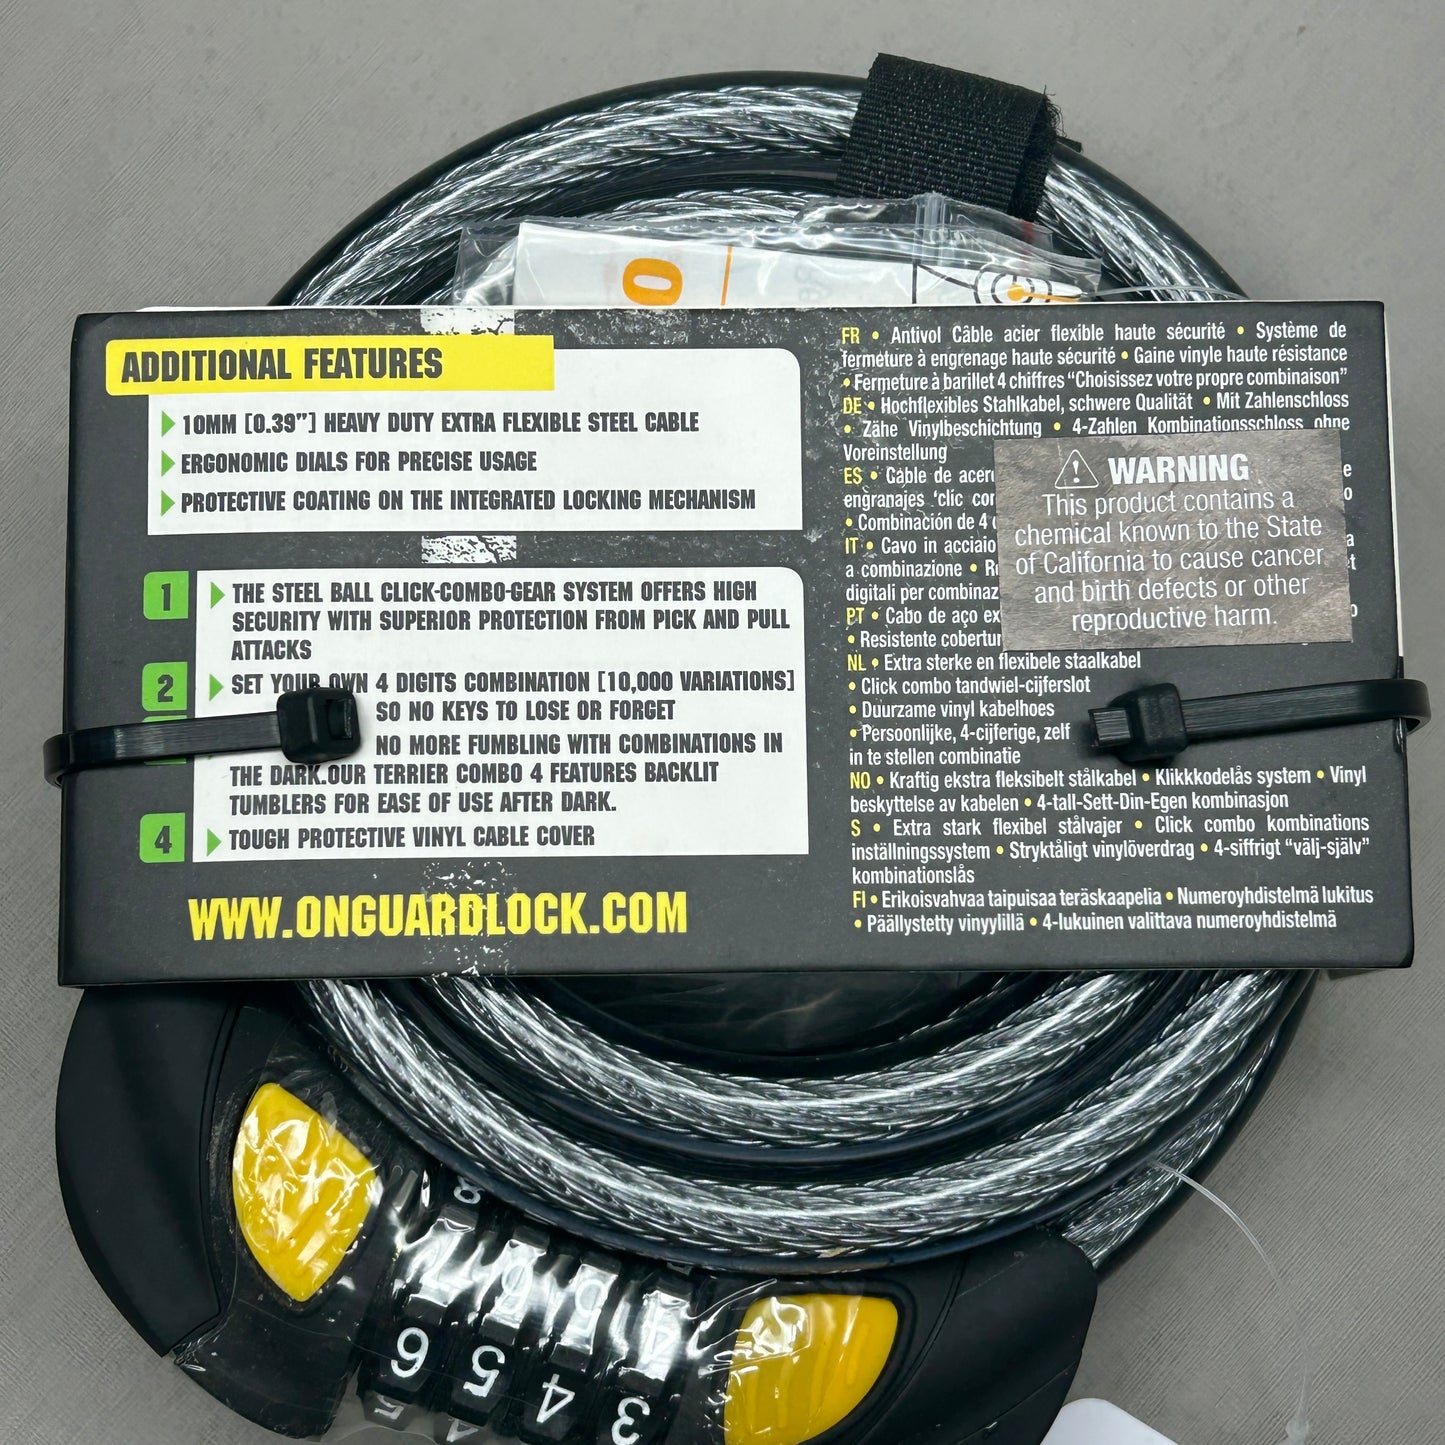 ONGUARD Terrier Combo GLO Bike Cable Lock 8064GLO (New)